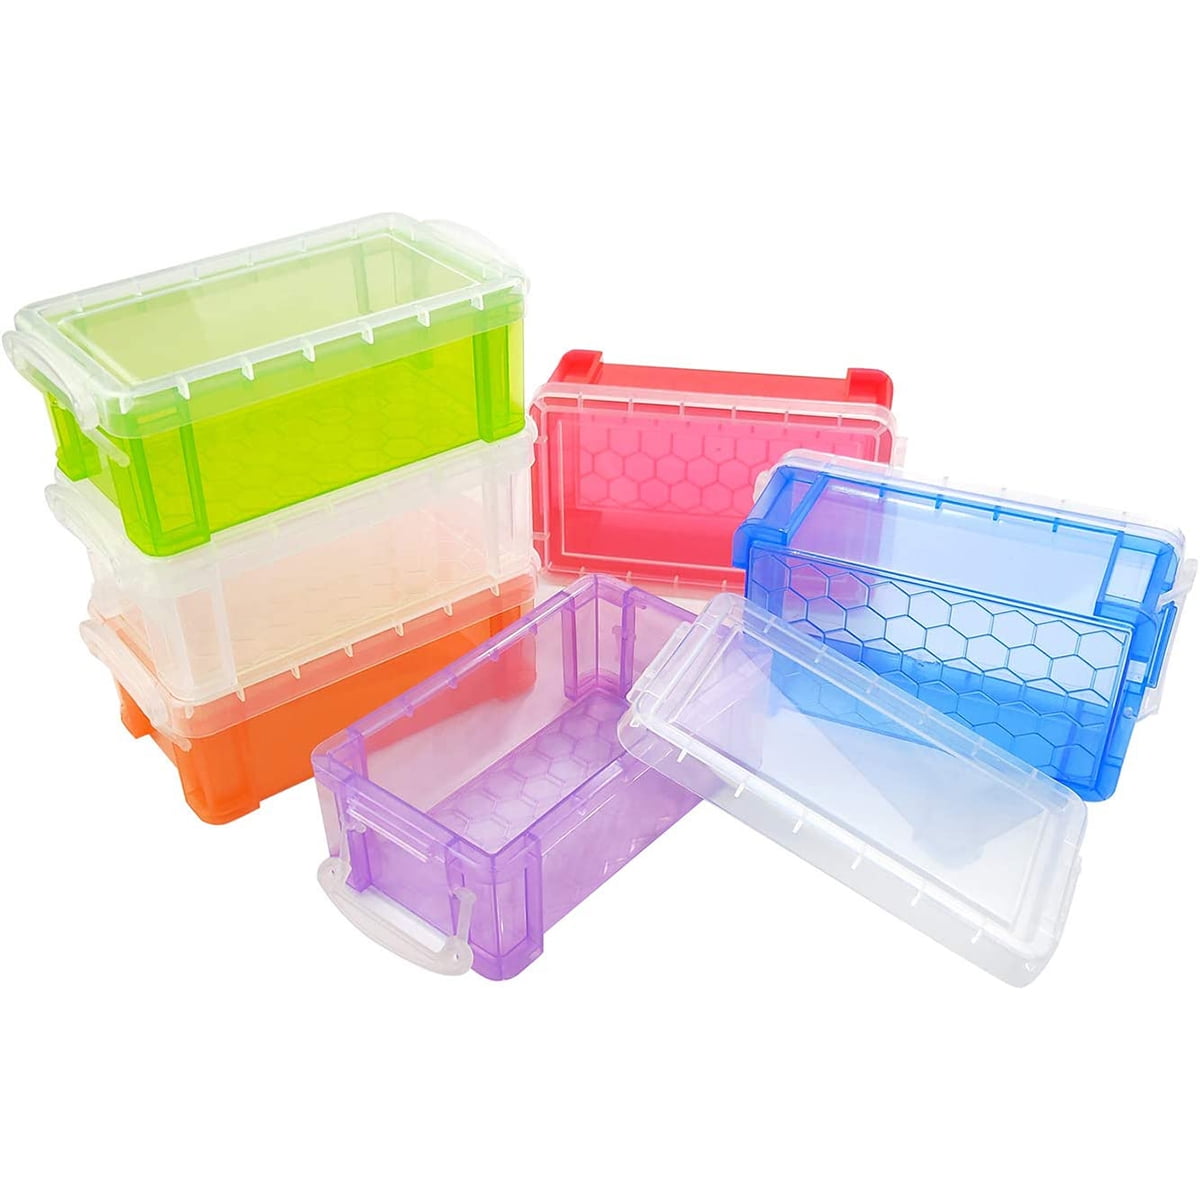 12 Pack 3.5x2.6x1.1 Inches Small Clear Plastic Box Storage